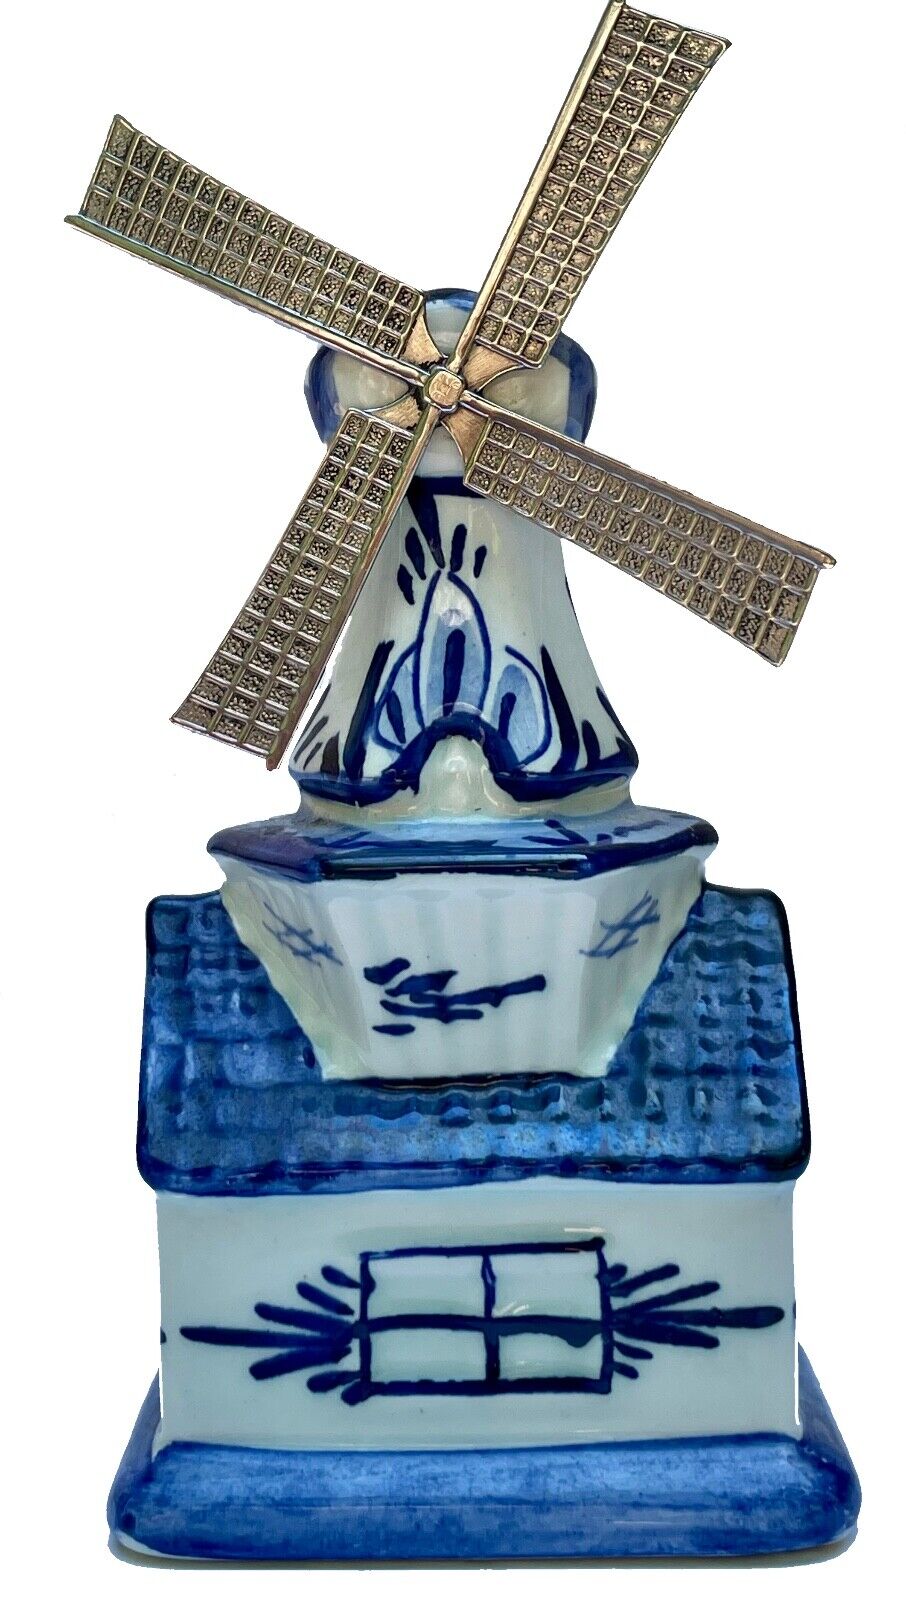 Vintage Authentic Blue Delft Pottery Windmill W/Moving Metal Blades 4.5